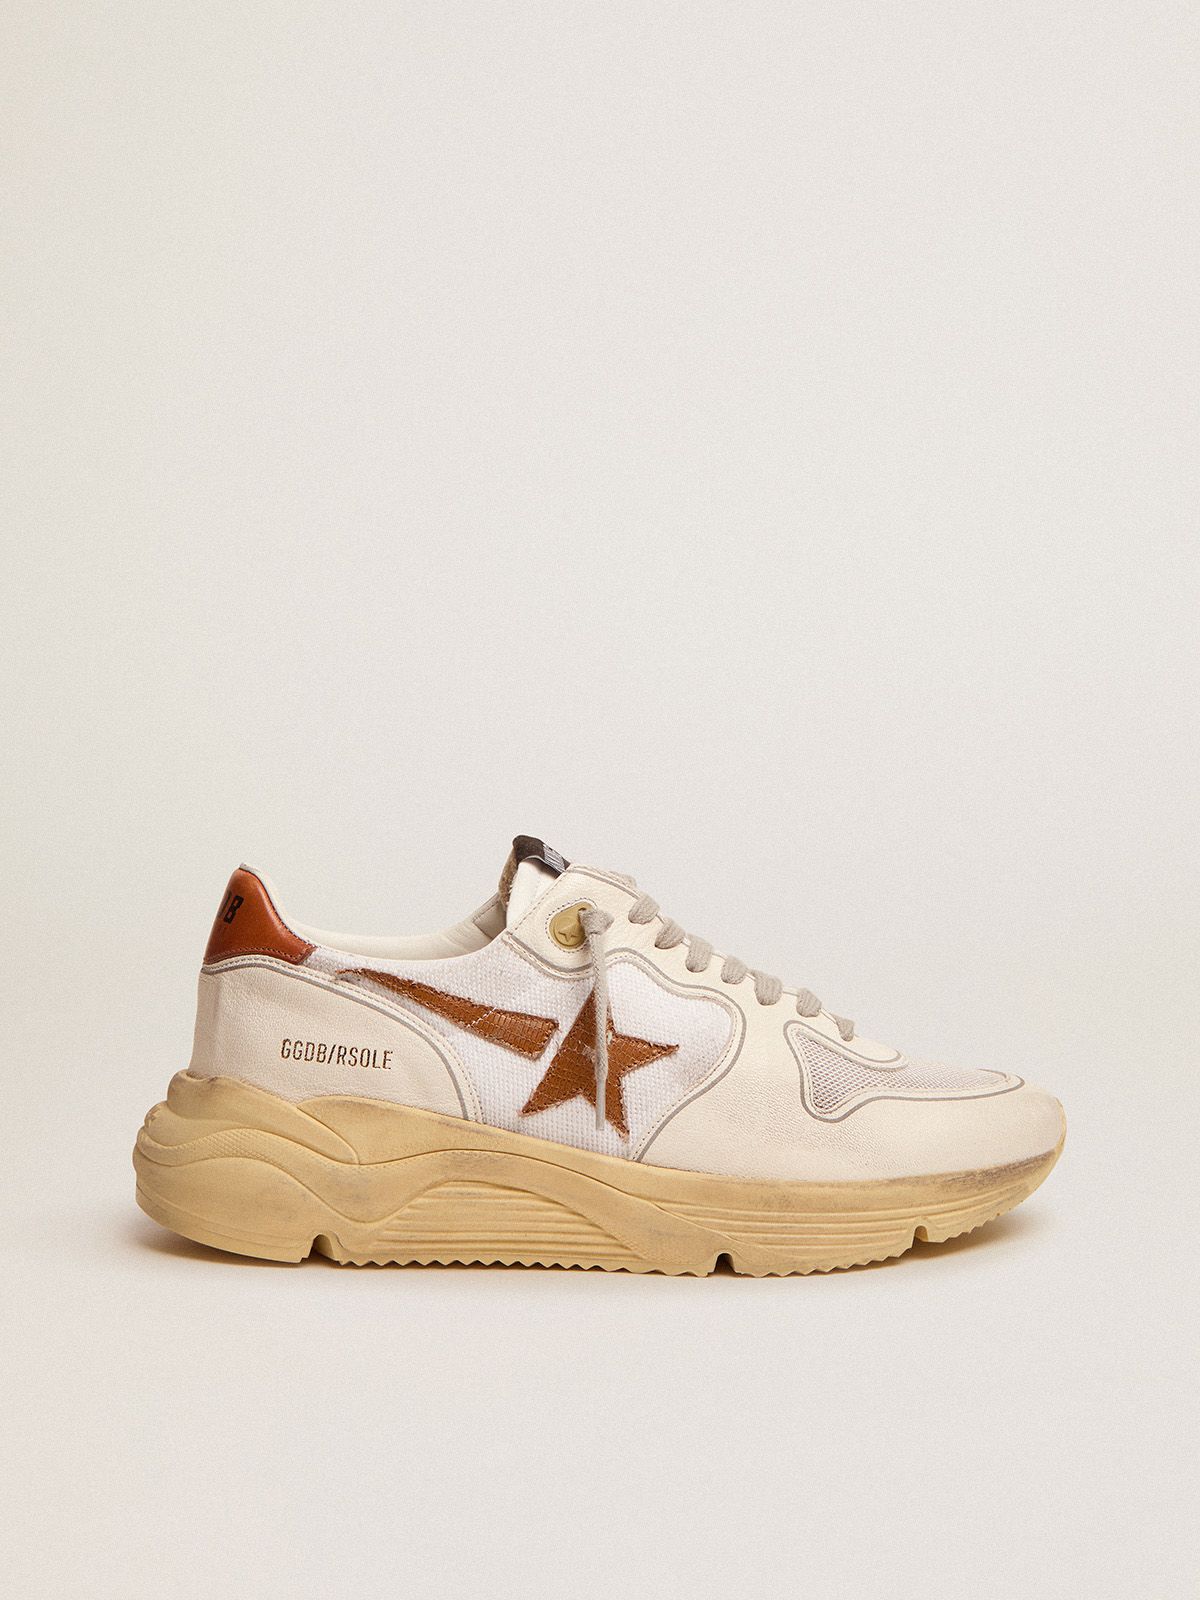 Superstar Ggdb Running Sole LTD sneakers with lizard-print brown leather star and tan leather heel tab